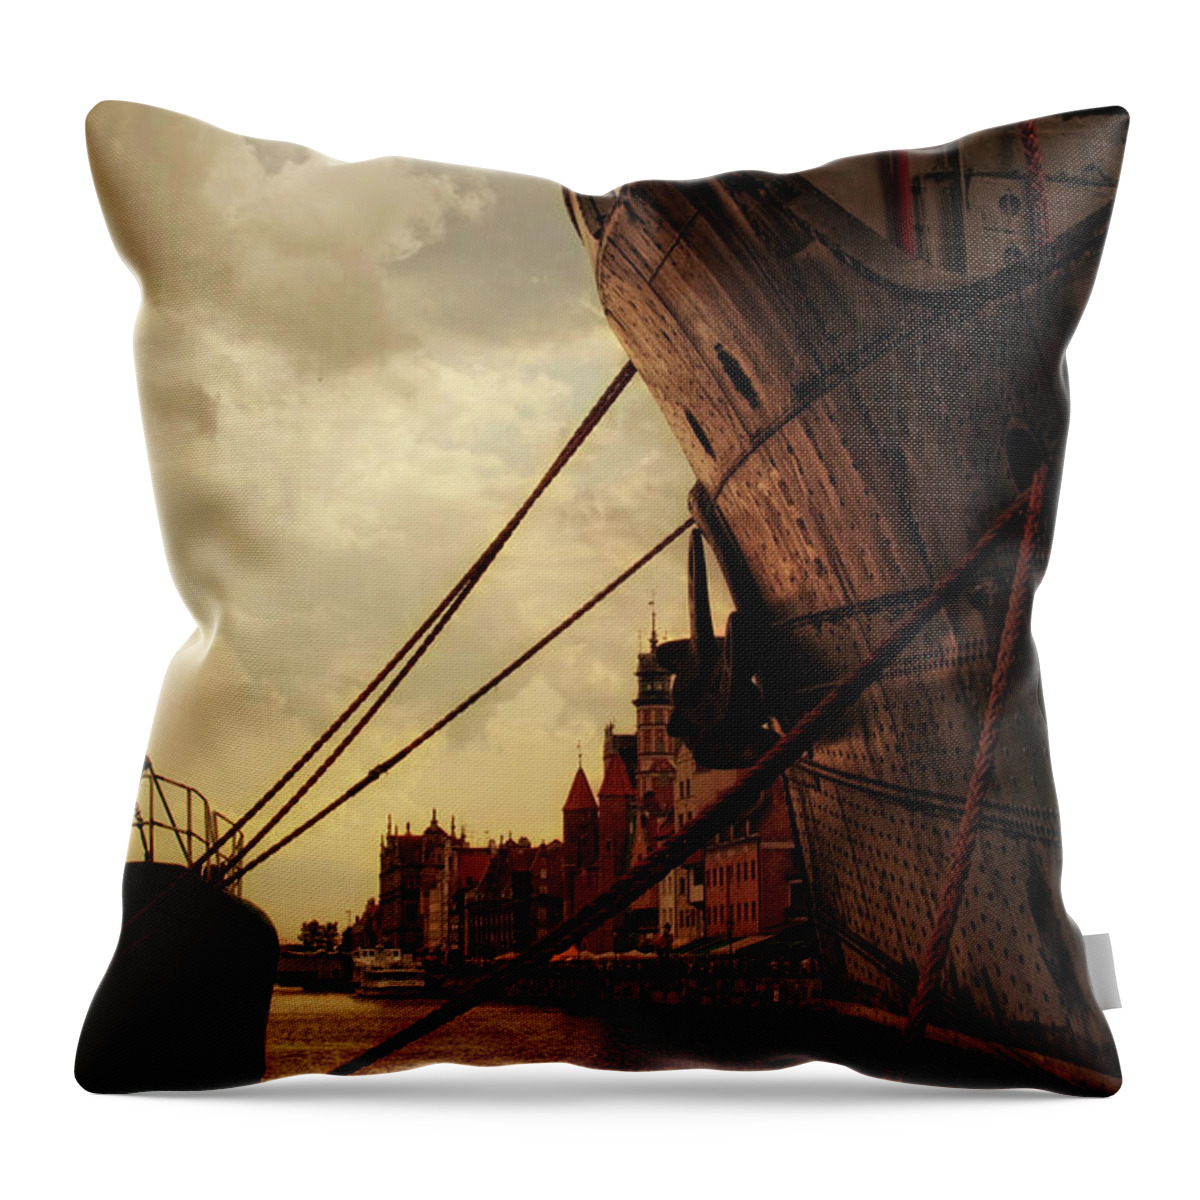 Tranquility Throw Pillow featuring the photograph Ship And Boat Harbour by Wojtekzet